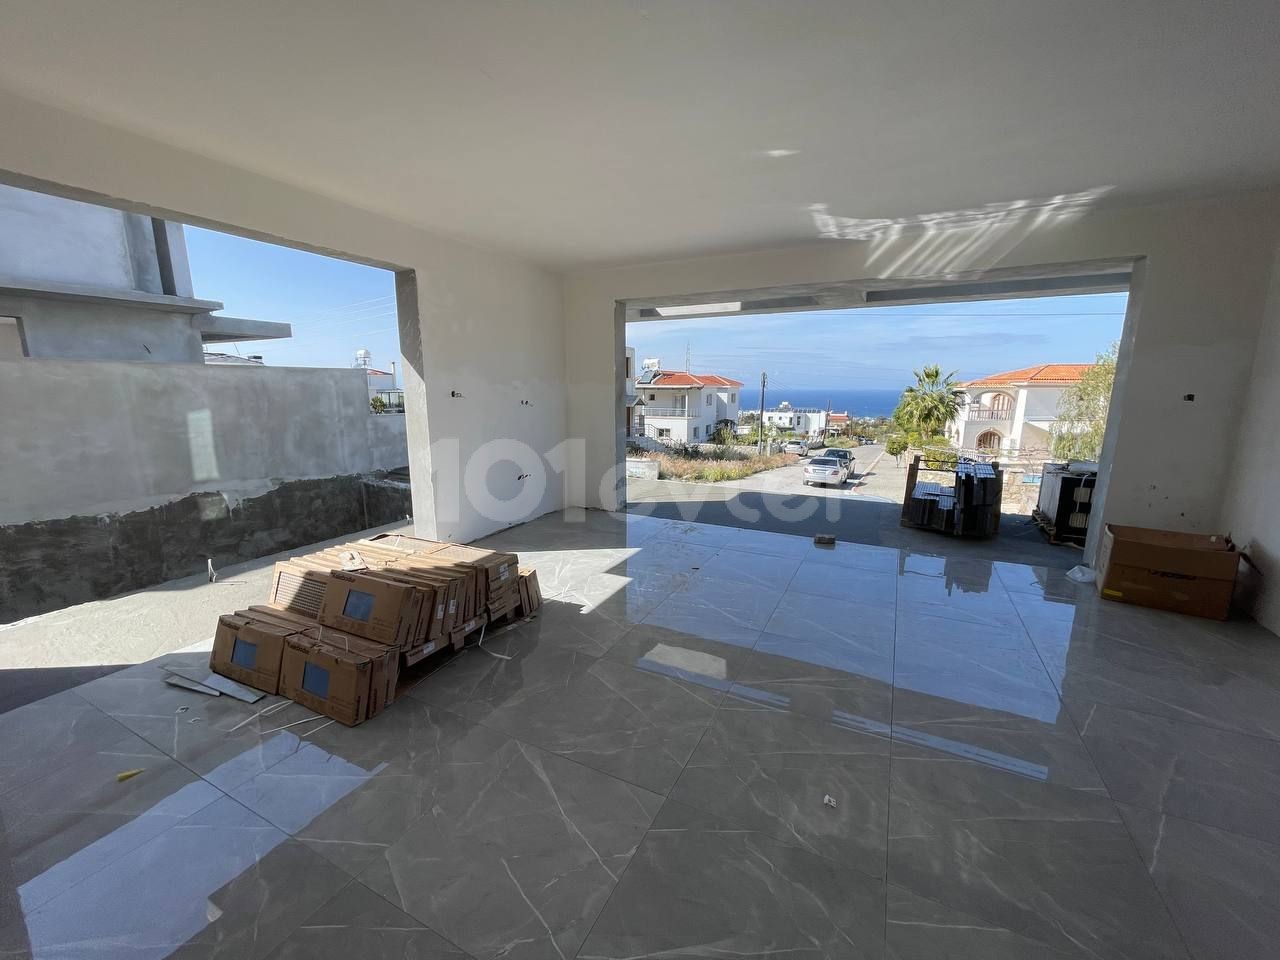 4-bedroom semi-detached villas with sea view and private pool for sale in Çatalköy